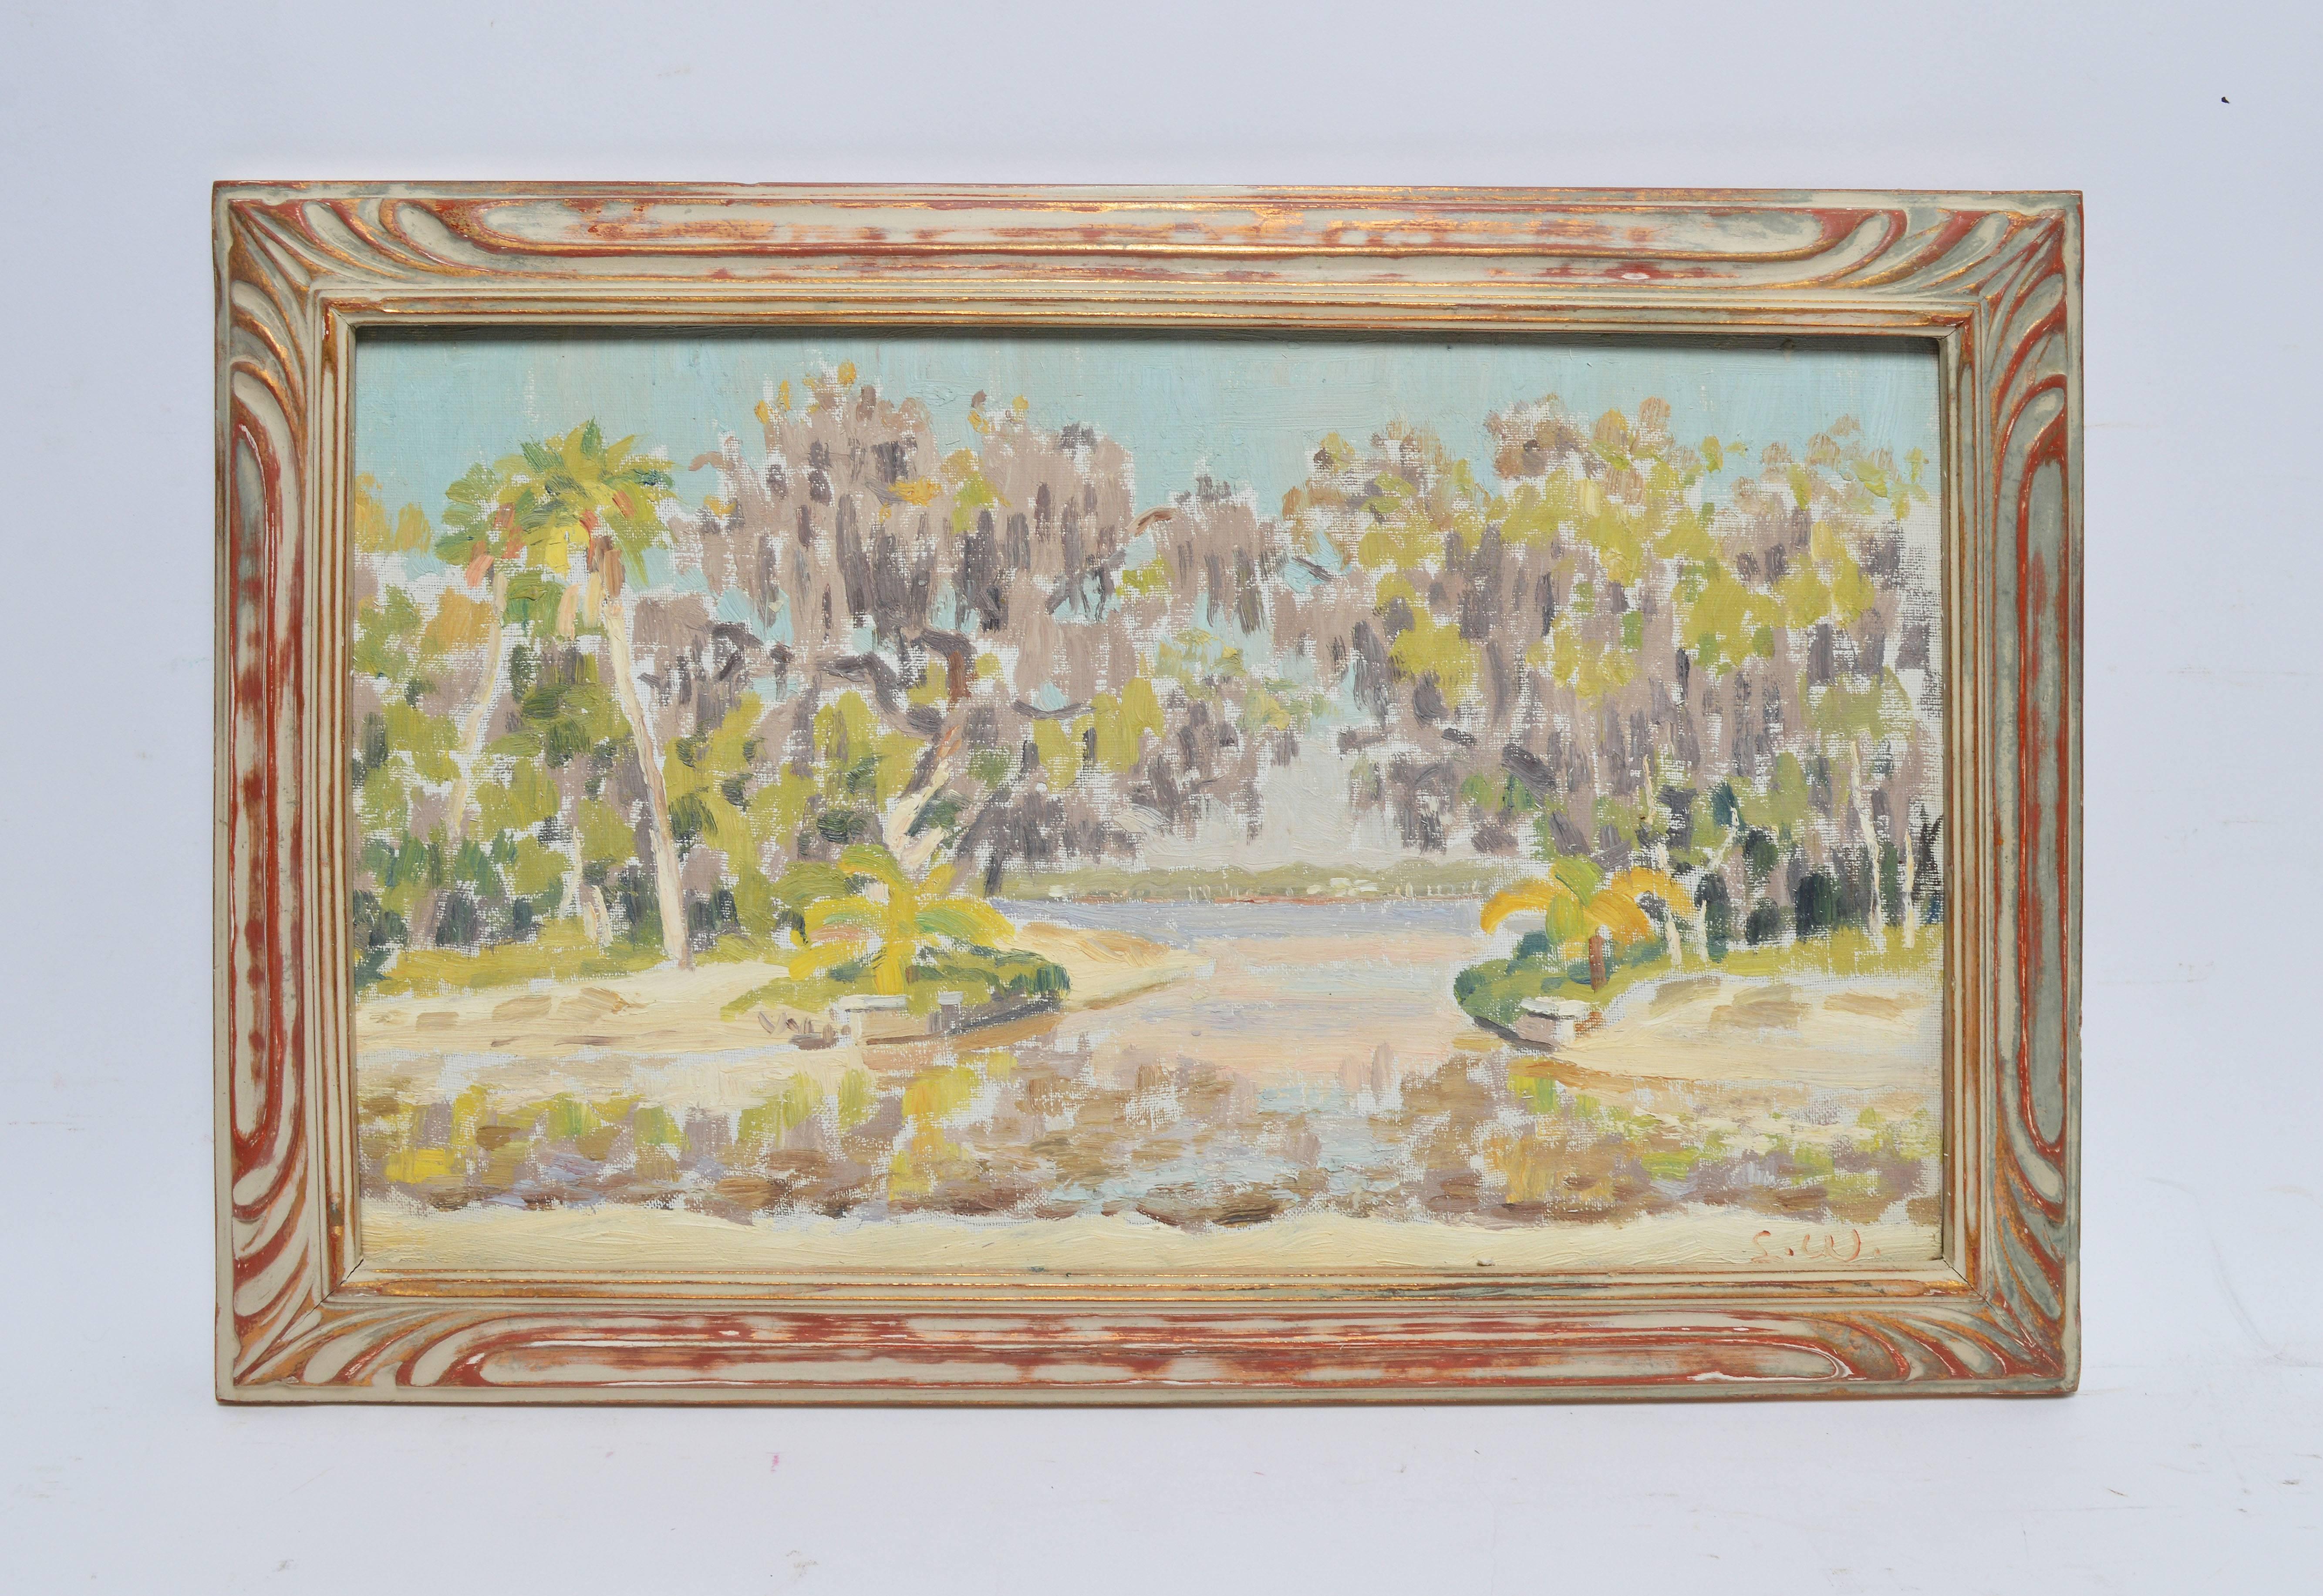 View of a Swamp by Ellsworth Woodward 1